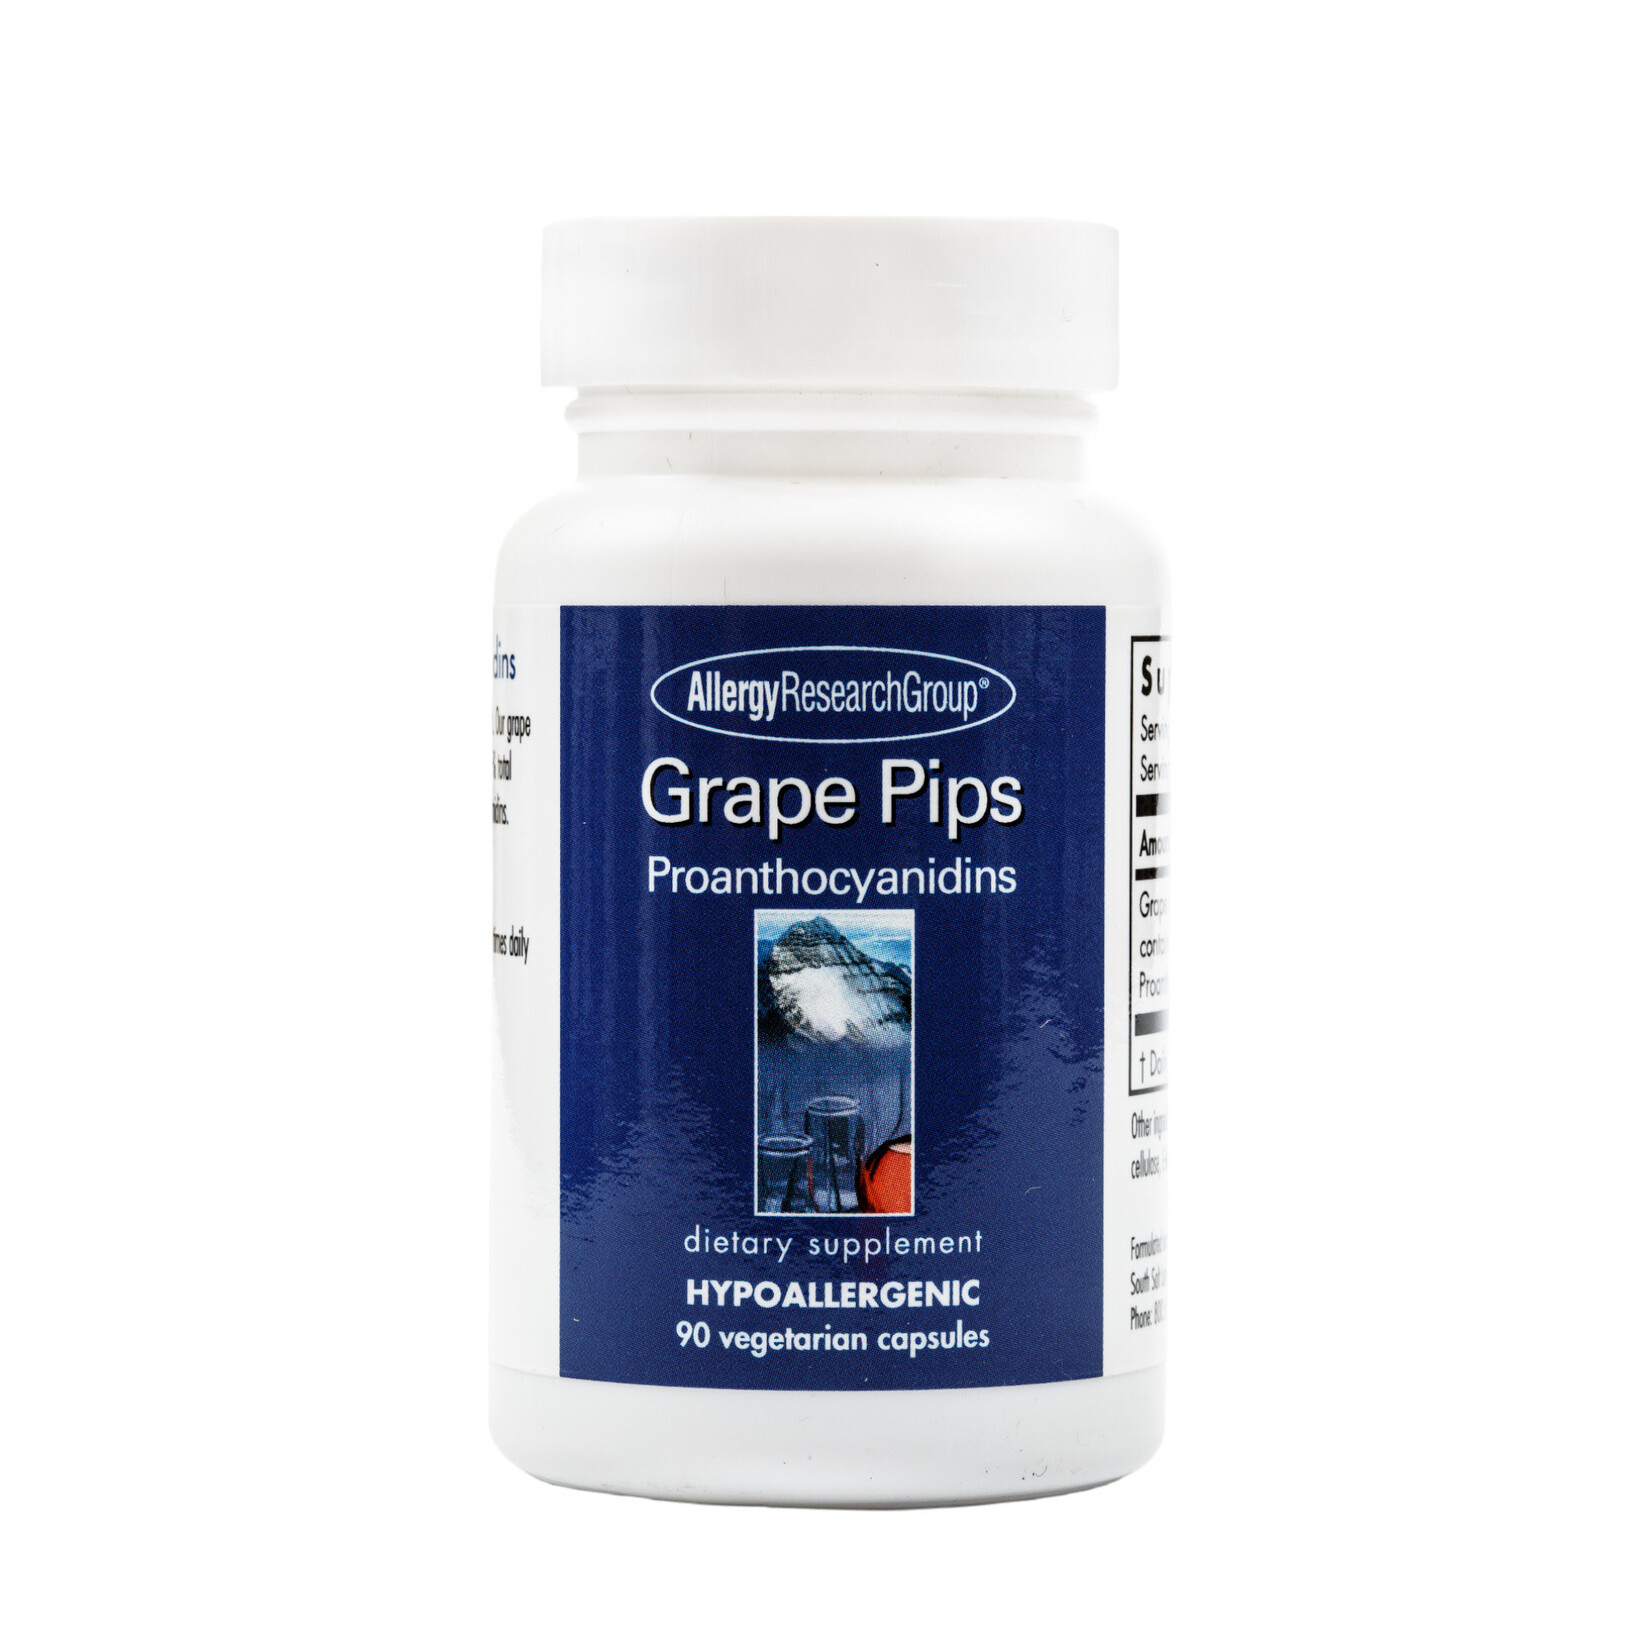 Allergy Research Group Grape Pips Proanthocyanidins 300mg 90c Allergy Research Group